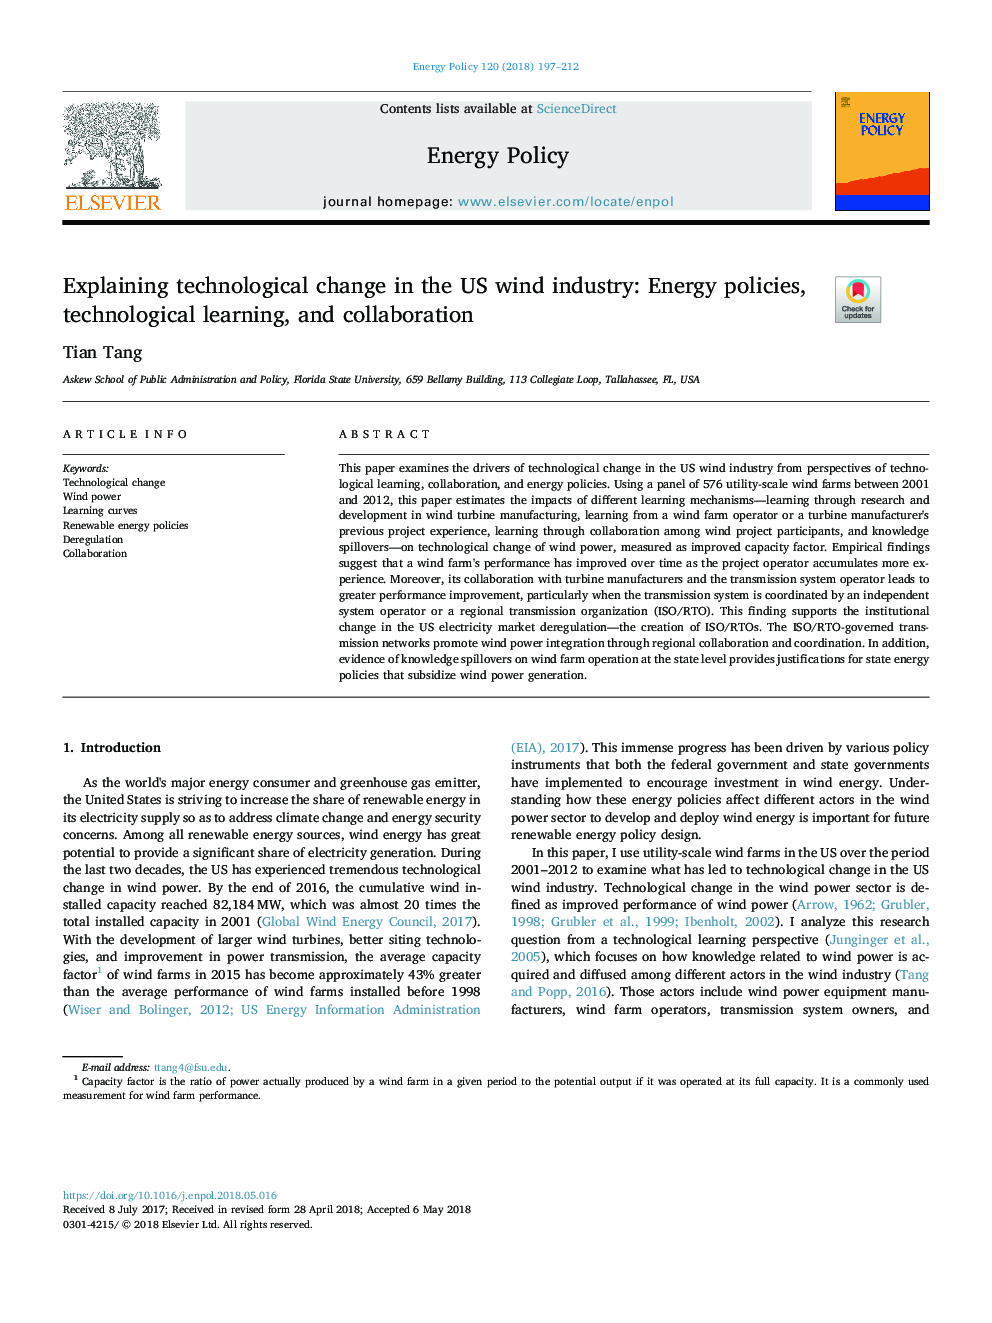 Explaining technological change in the US wind industry: Energy policies, technological learning, and collaboration